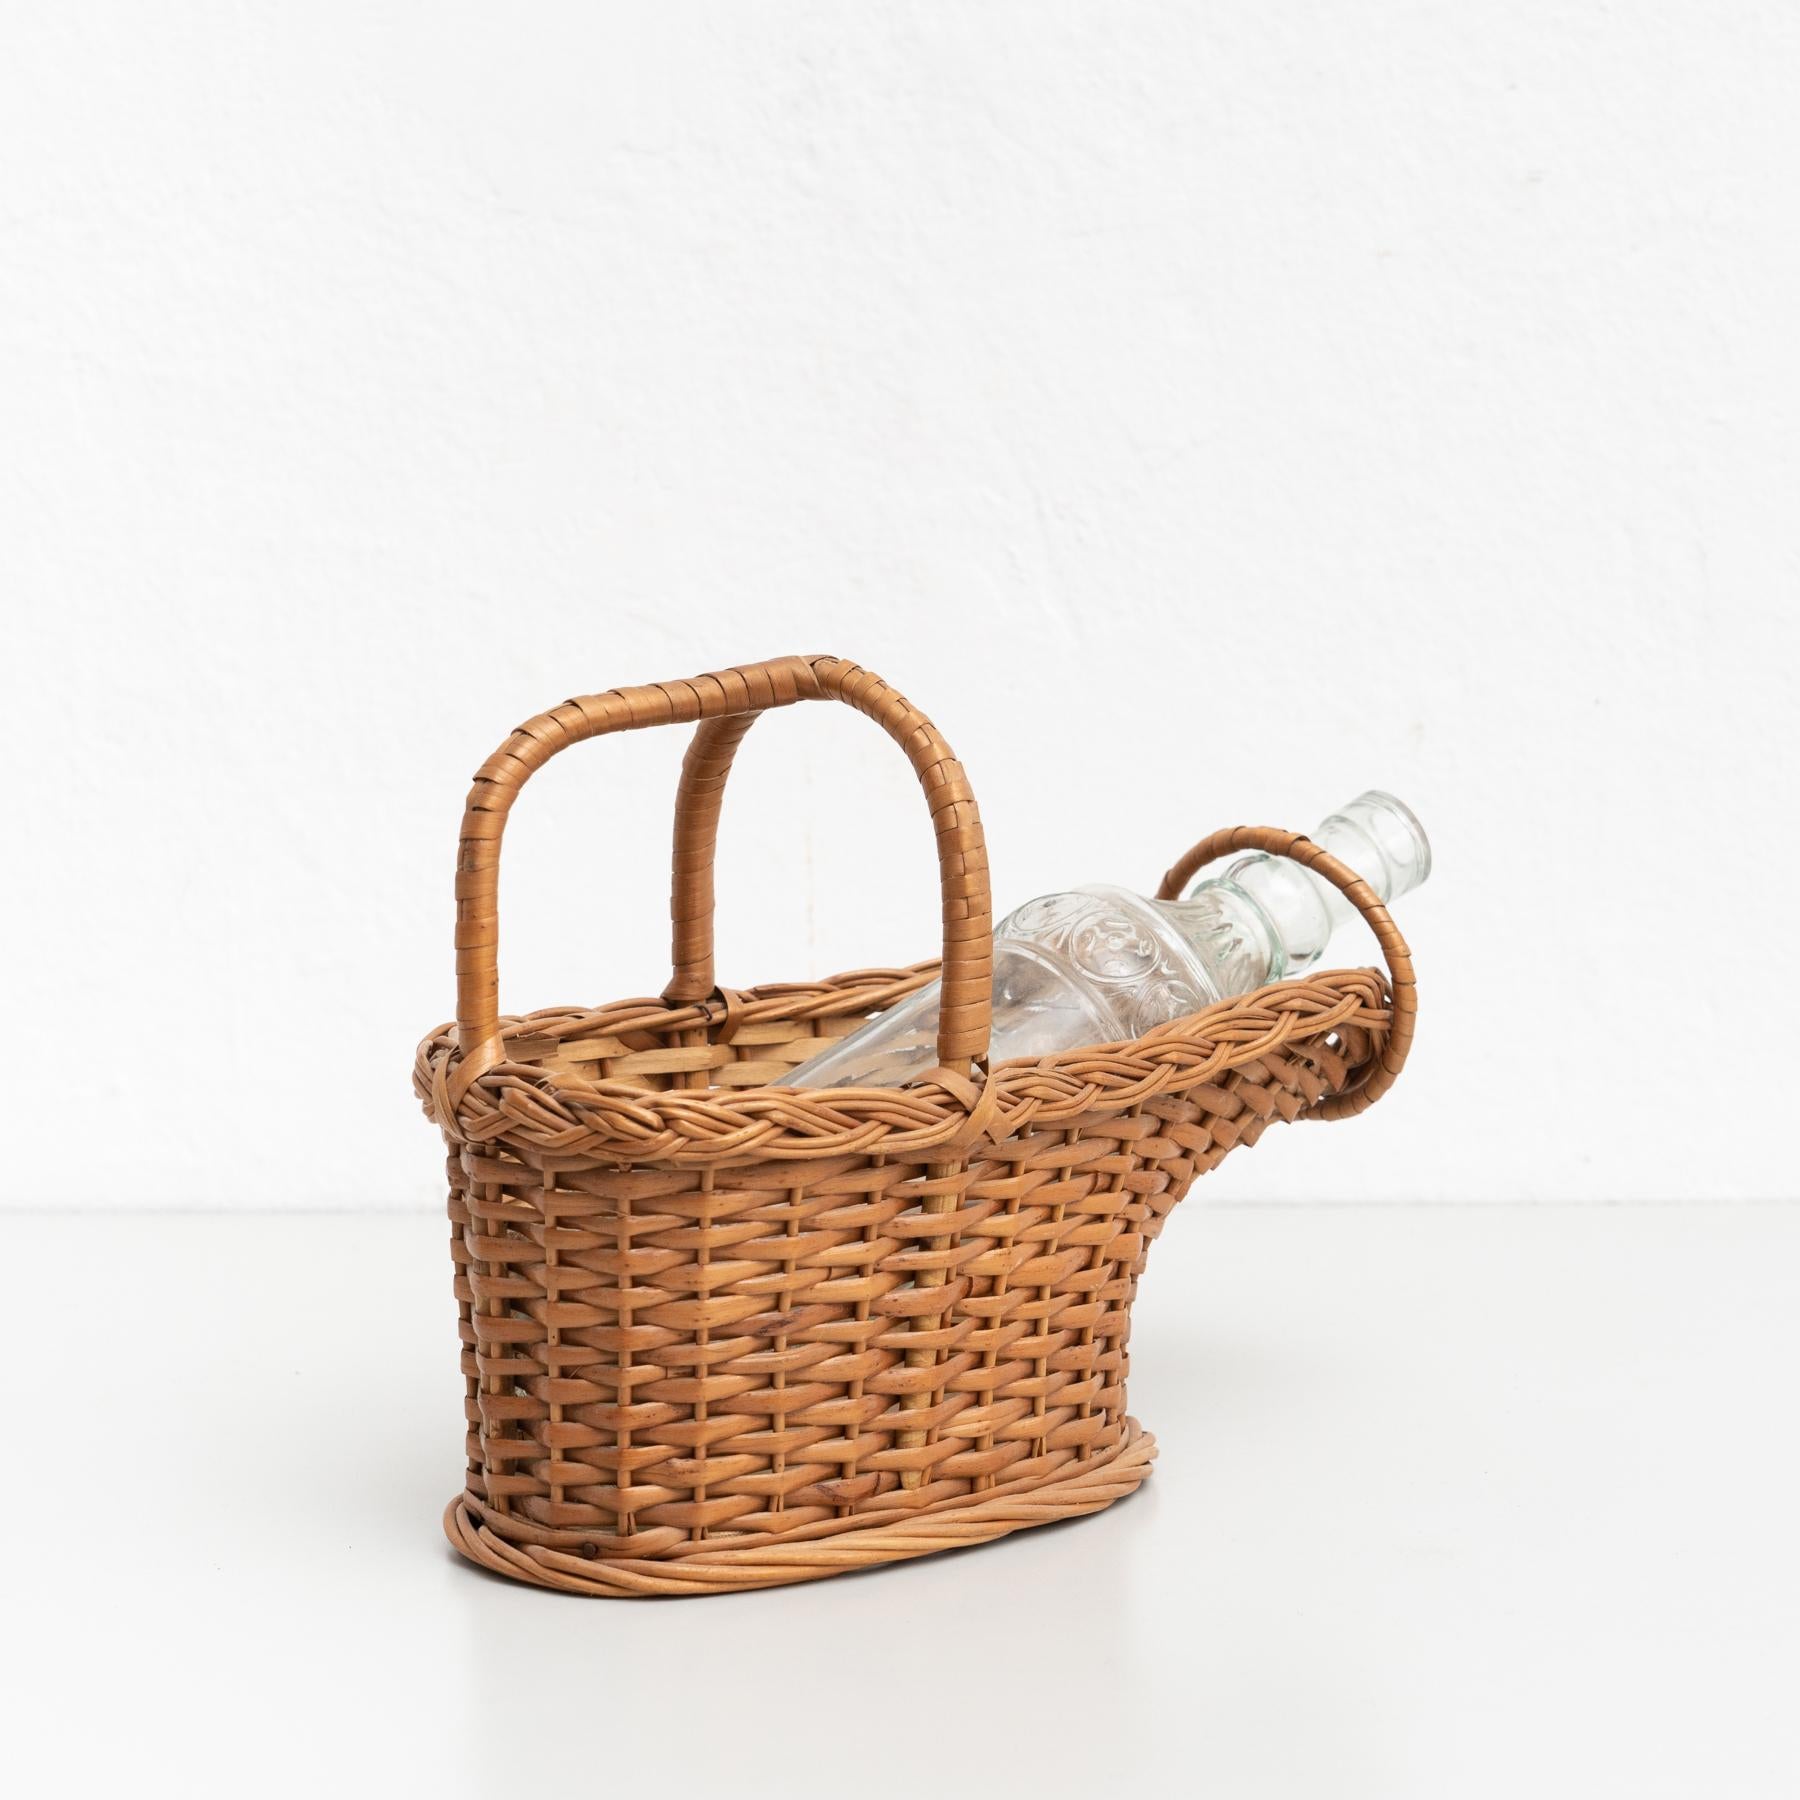 Vintage wicker made bottle rack holder.

Manufactured in Spain by unknown manufacturer, circa 1970

In original condition with minor wear consistent of age and use, preserving a beautiful patina.

Materials:
Wicker
Glass.